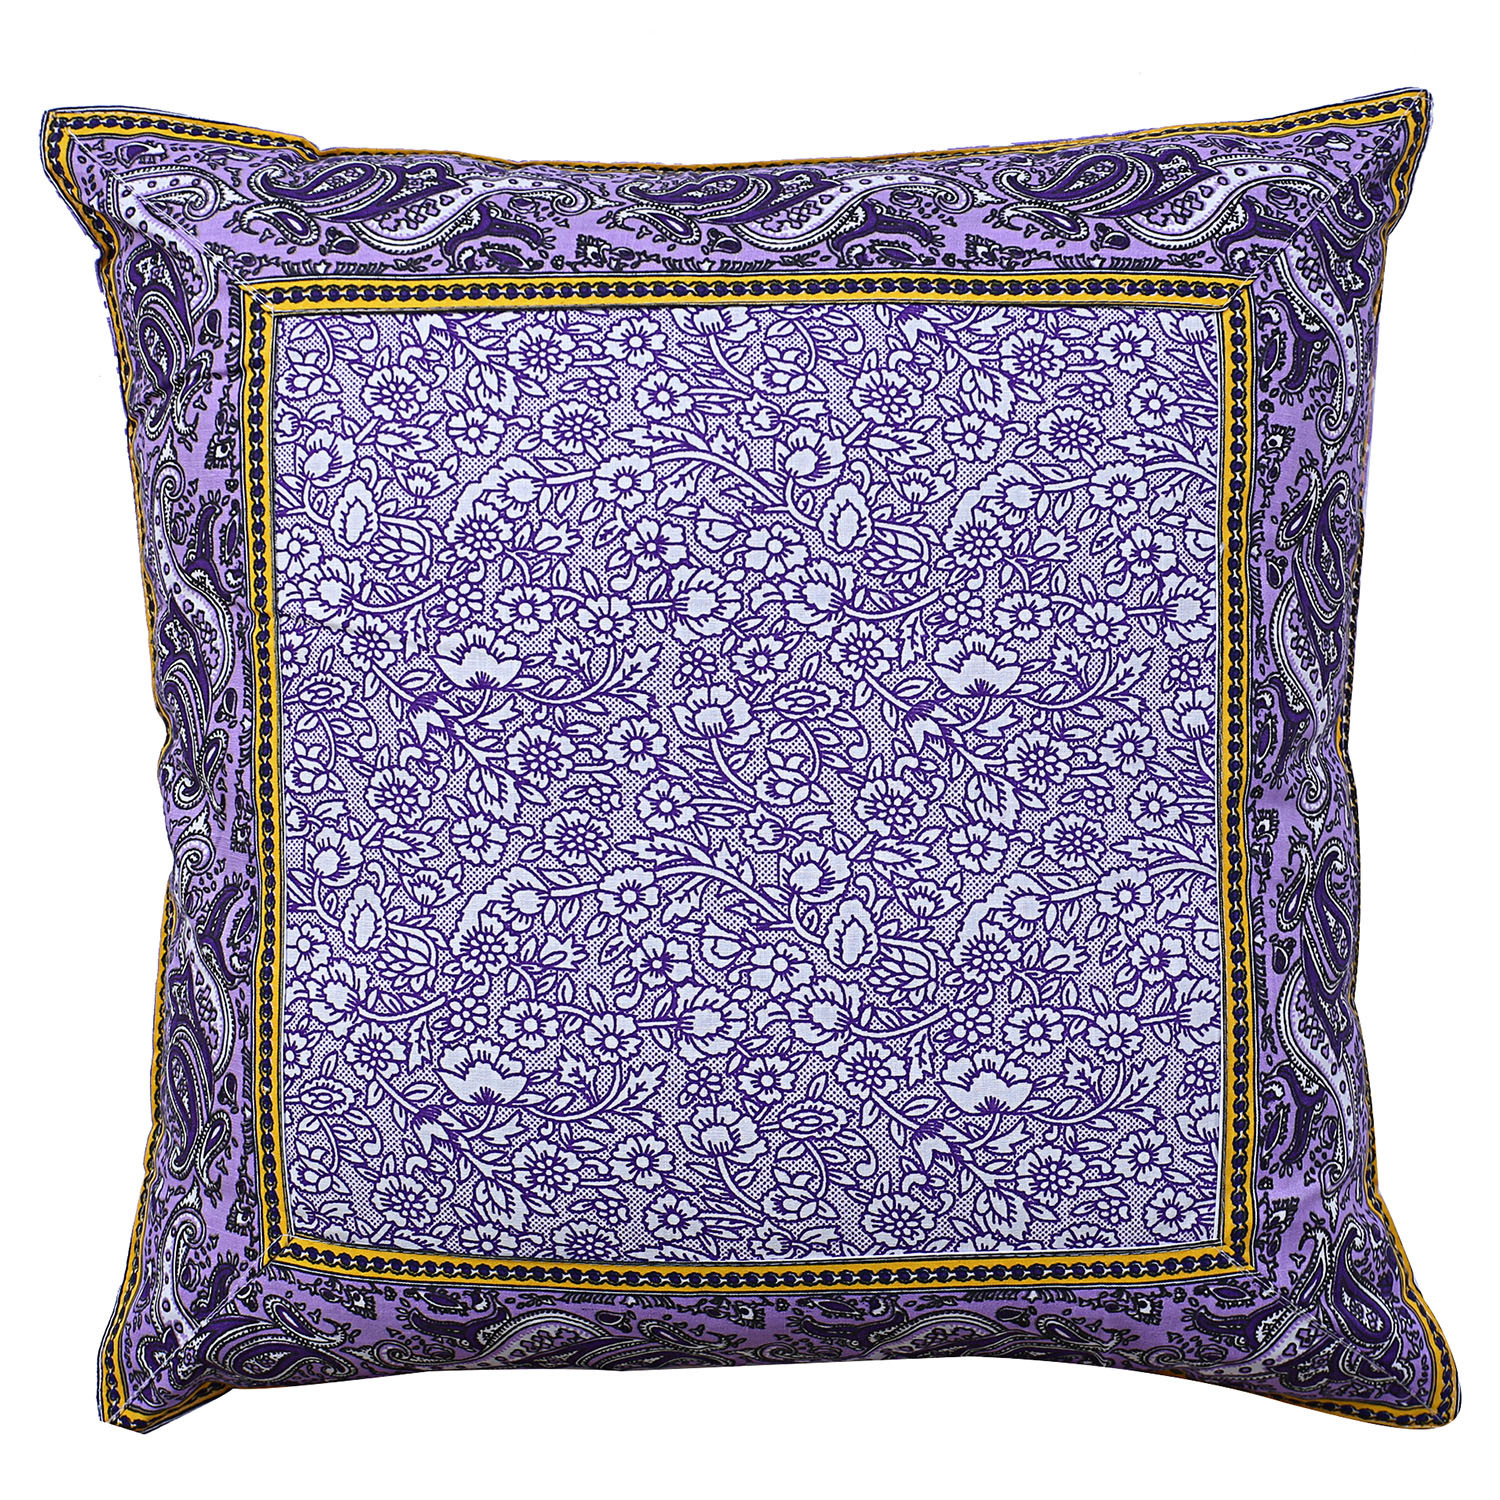 Kuber Industries Cushion Cover|Ractangle Cushion Covers|Sofa Cushion Covers|Cushion Covers 16 inch x 16 inch|Cushion Cover Set of 5 (Purple)